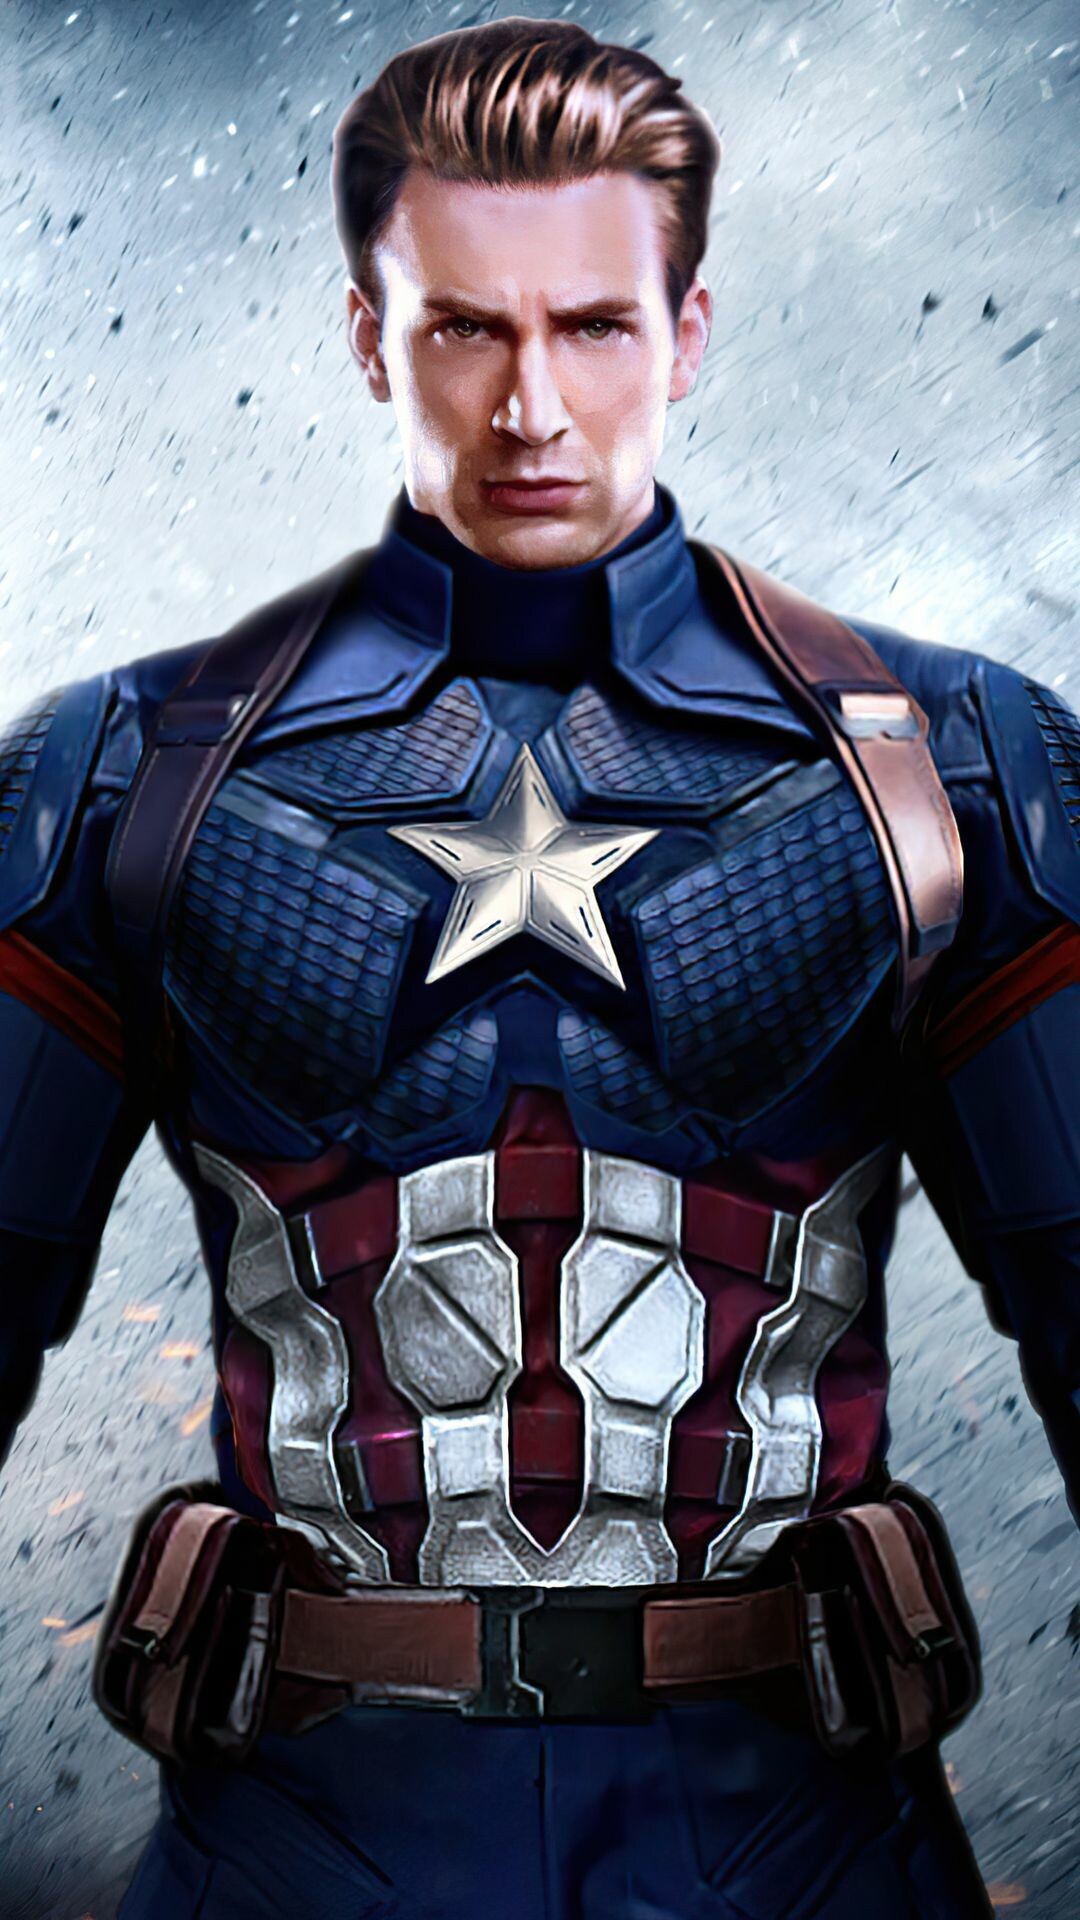 Avengers: Recipient of the Super Soldier serum, World War II hero Steve Rogers fights for American ideals as one of the world’s mightiest heroes and the leader of the superheroes team. 1080x1920 Full HD Wallpaper.